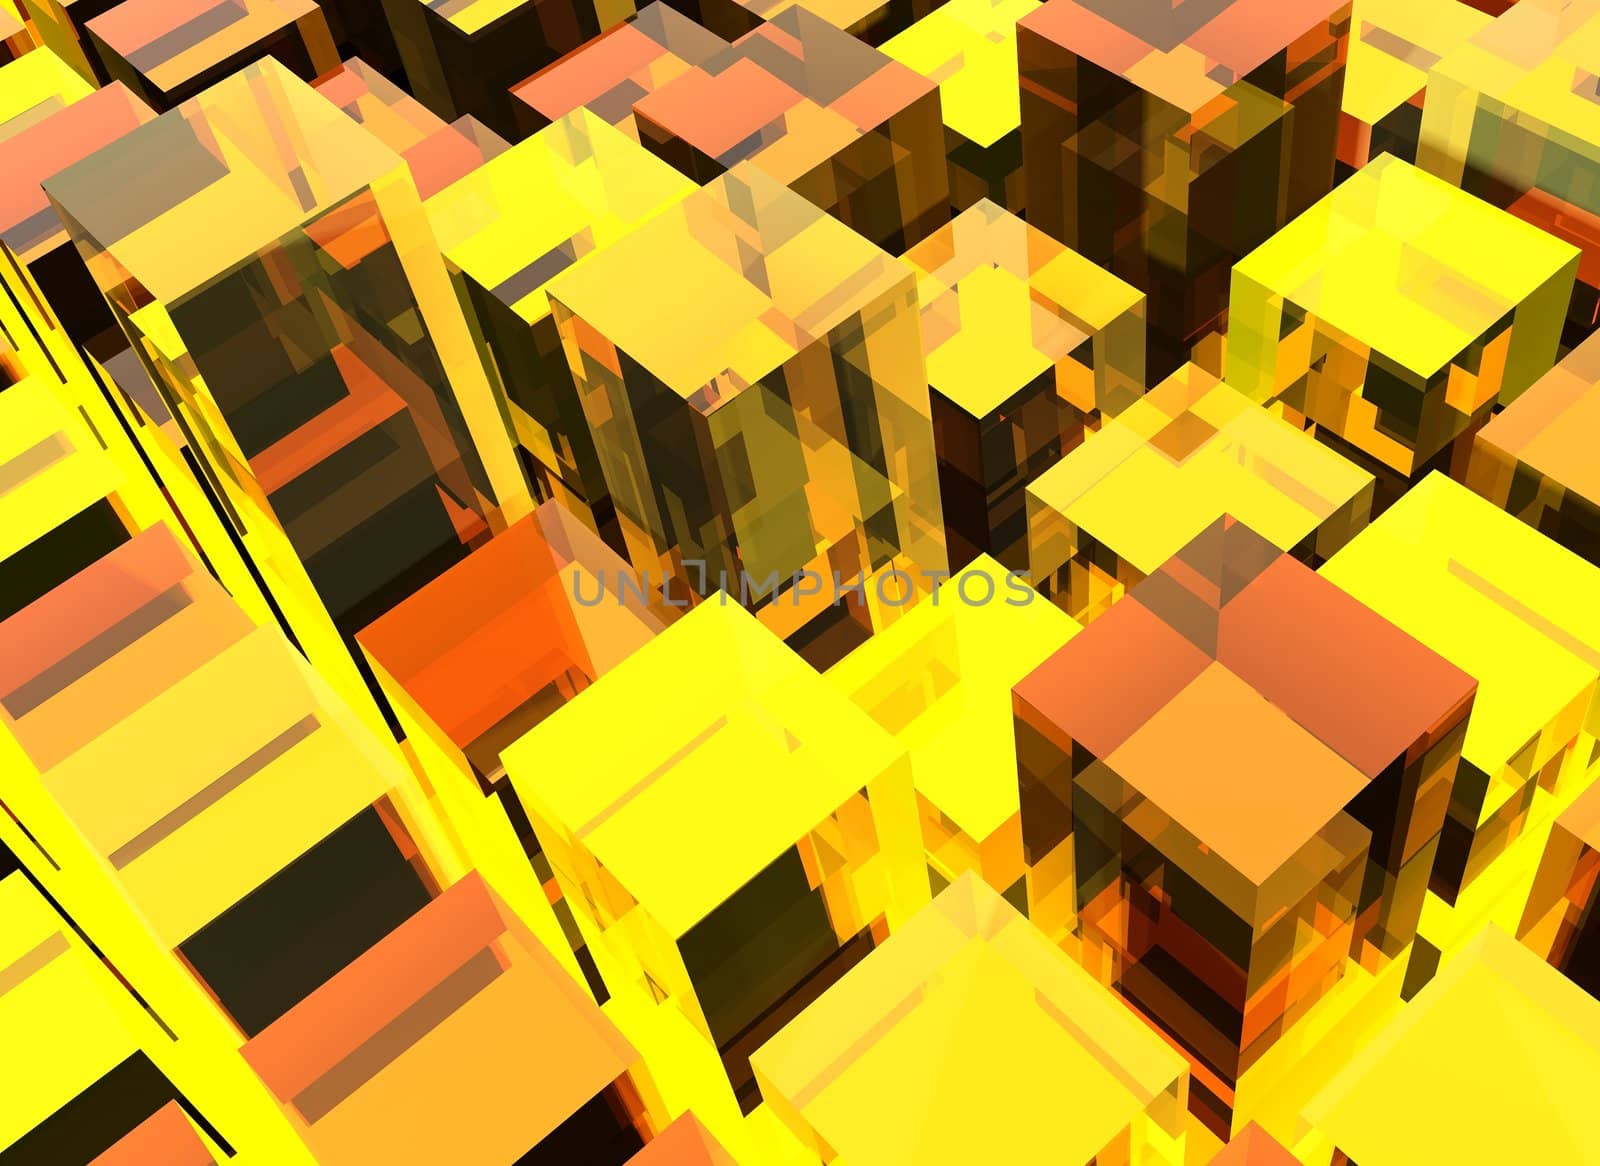 Conceptual abstract background consisting of cubes fulfilling whole area of view. Concept is rendered with slight reflections. Cubes are portrayed in various sizes and mostly in yellow to orange color blending with slight  reflections.